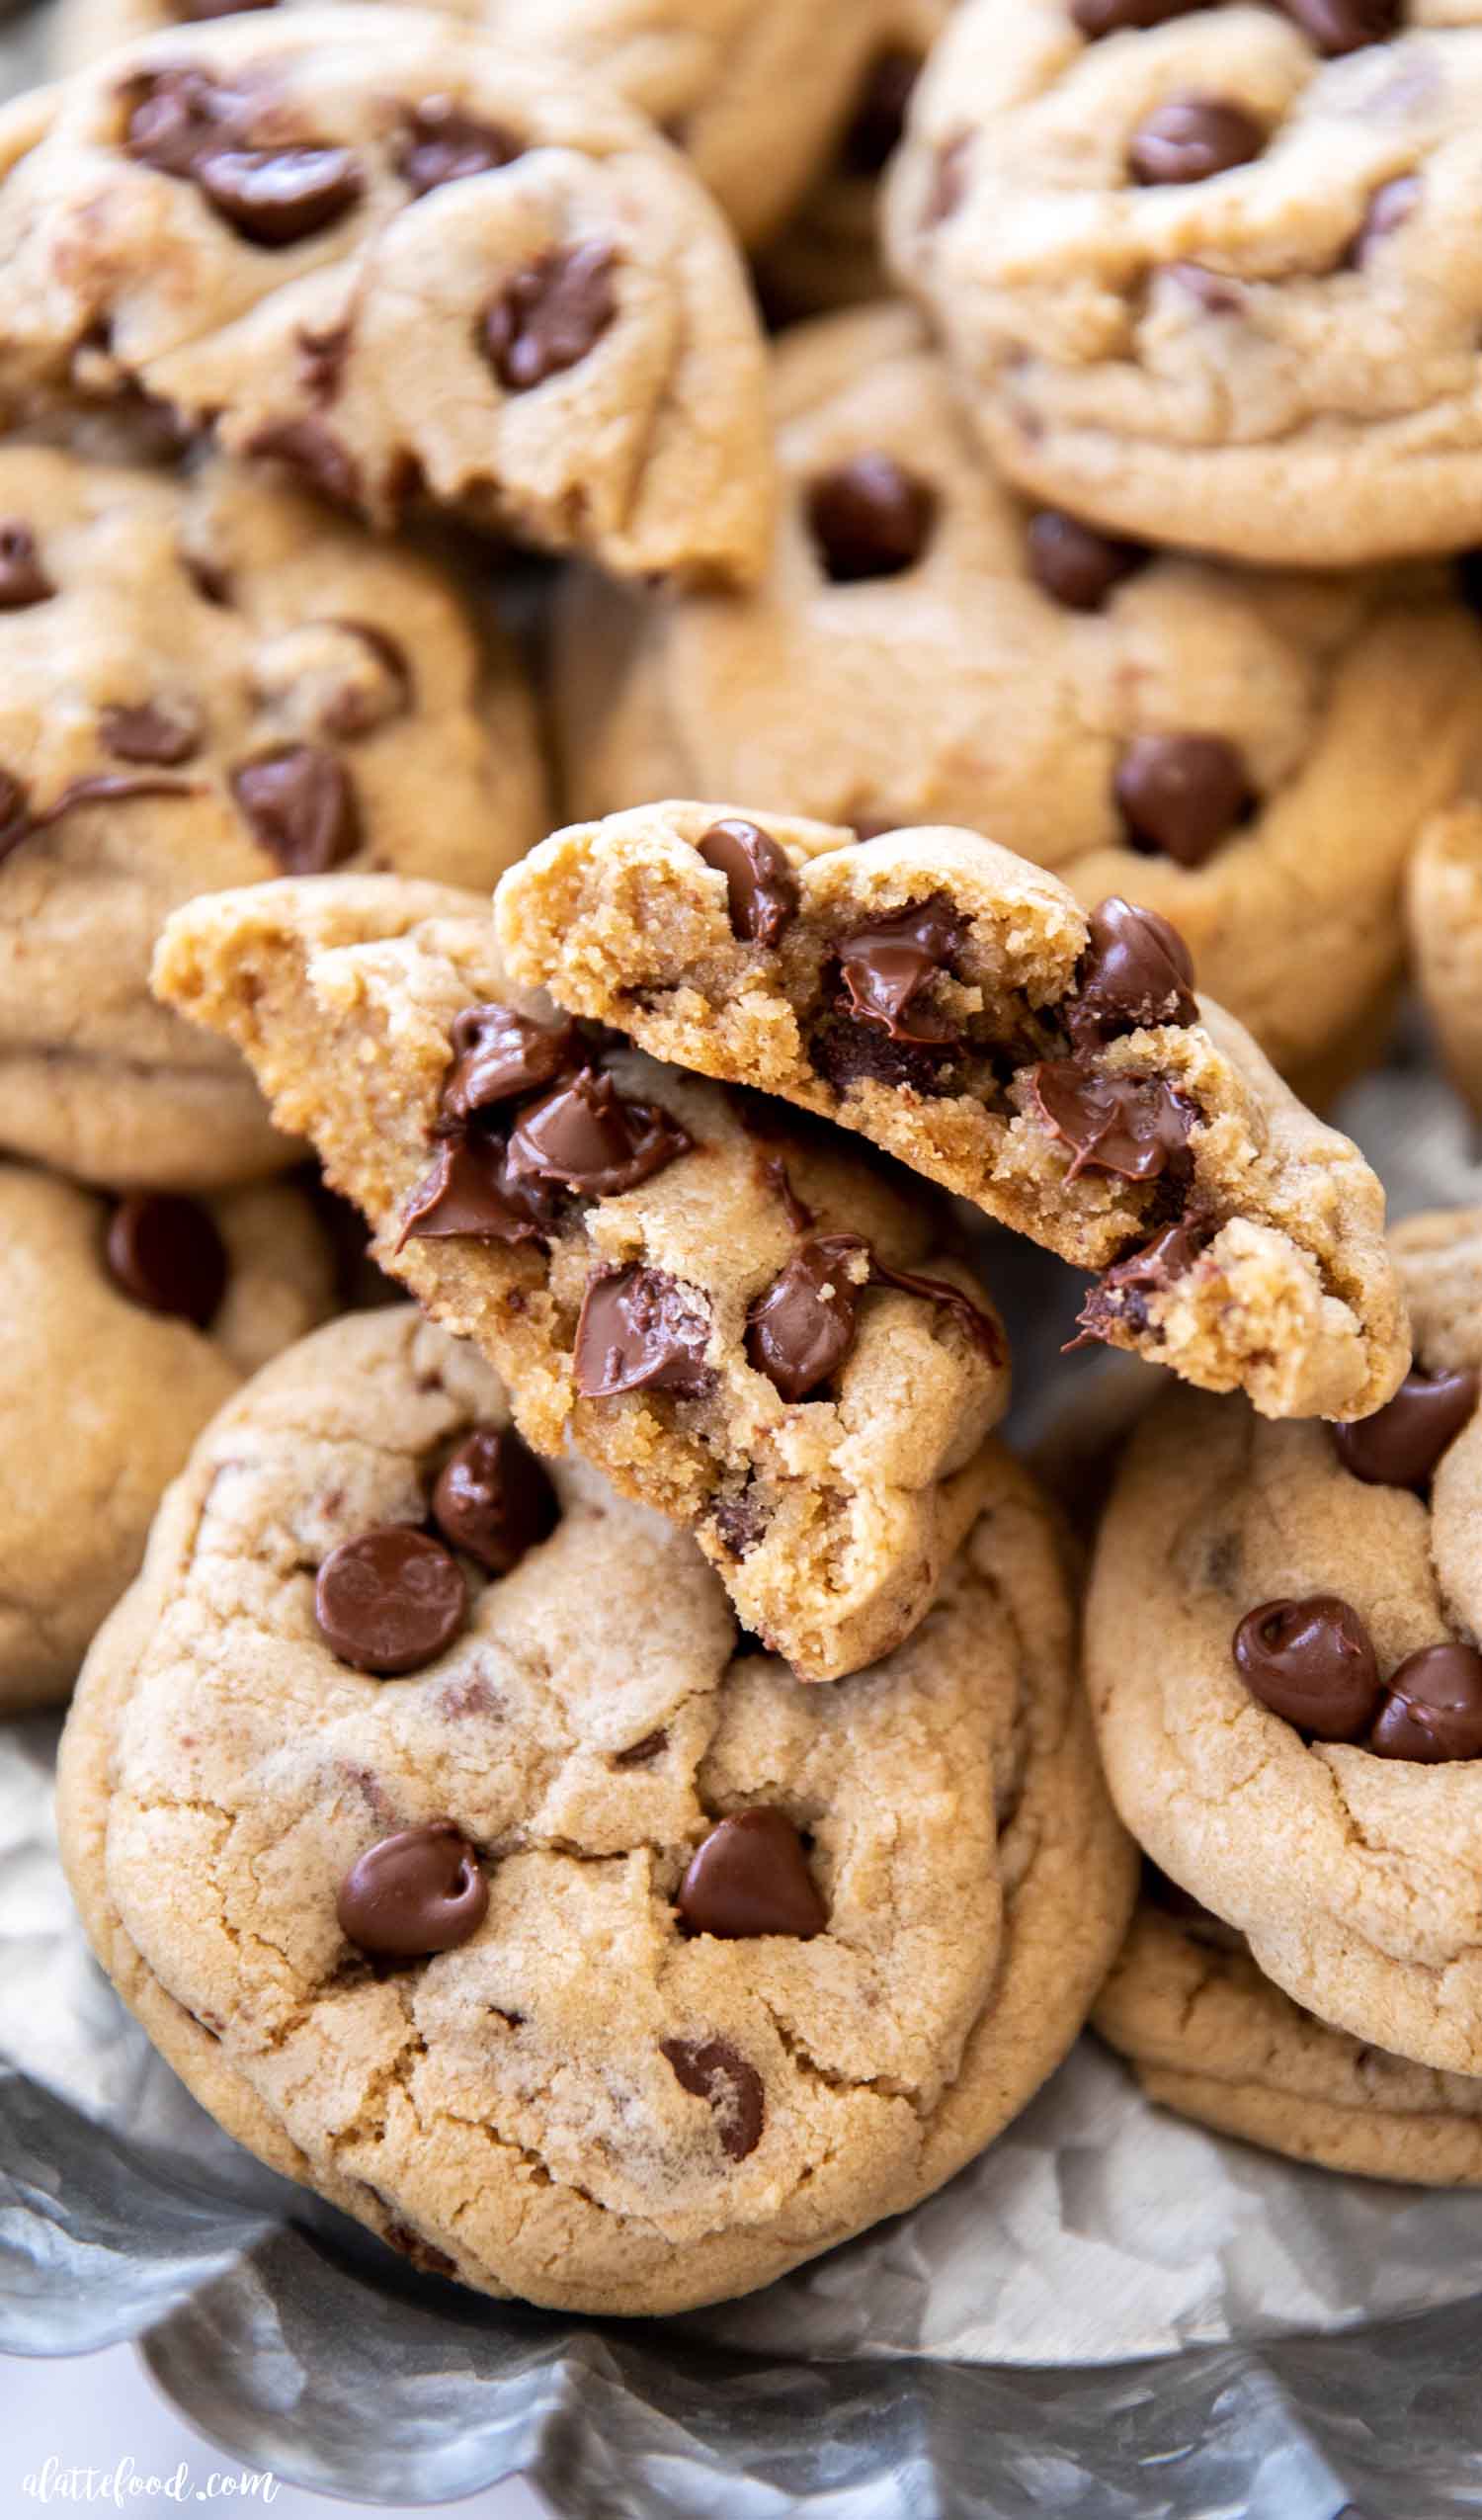 Chewy Chocolate Chip Cookies - A favorite recipe!